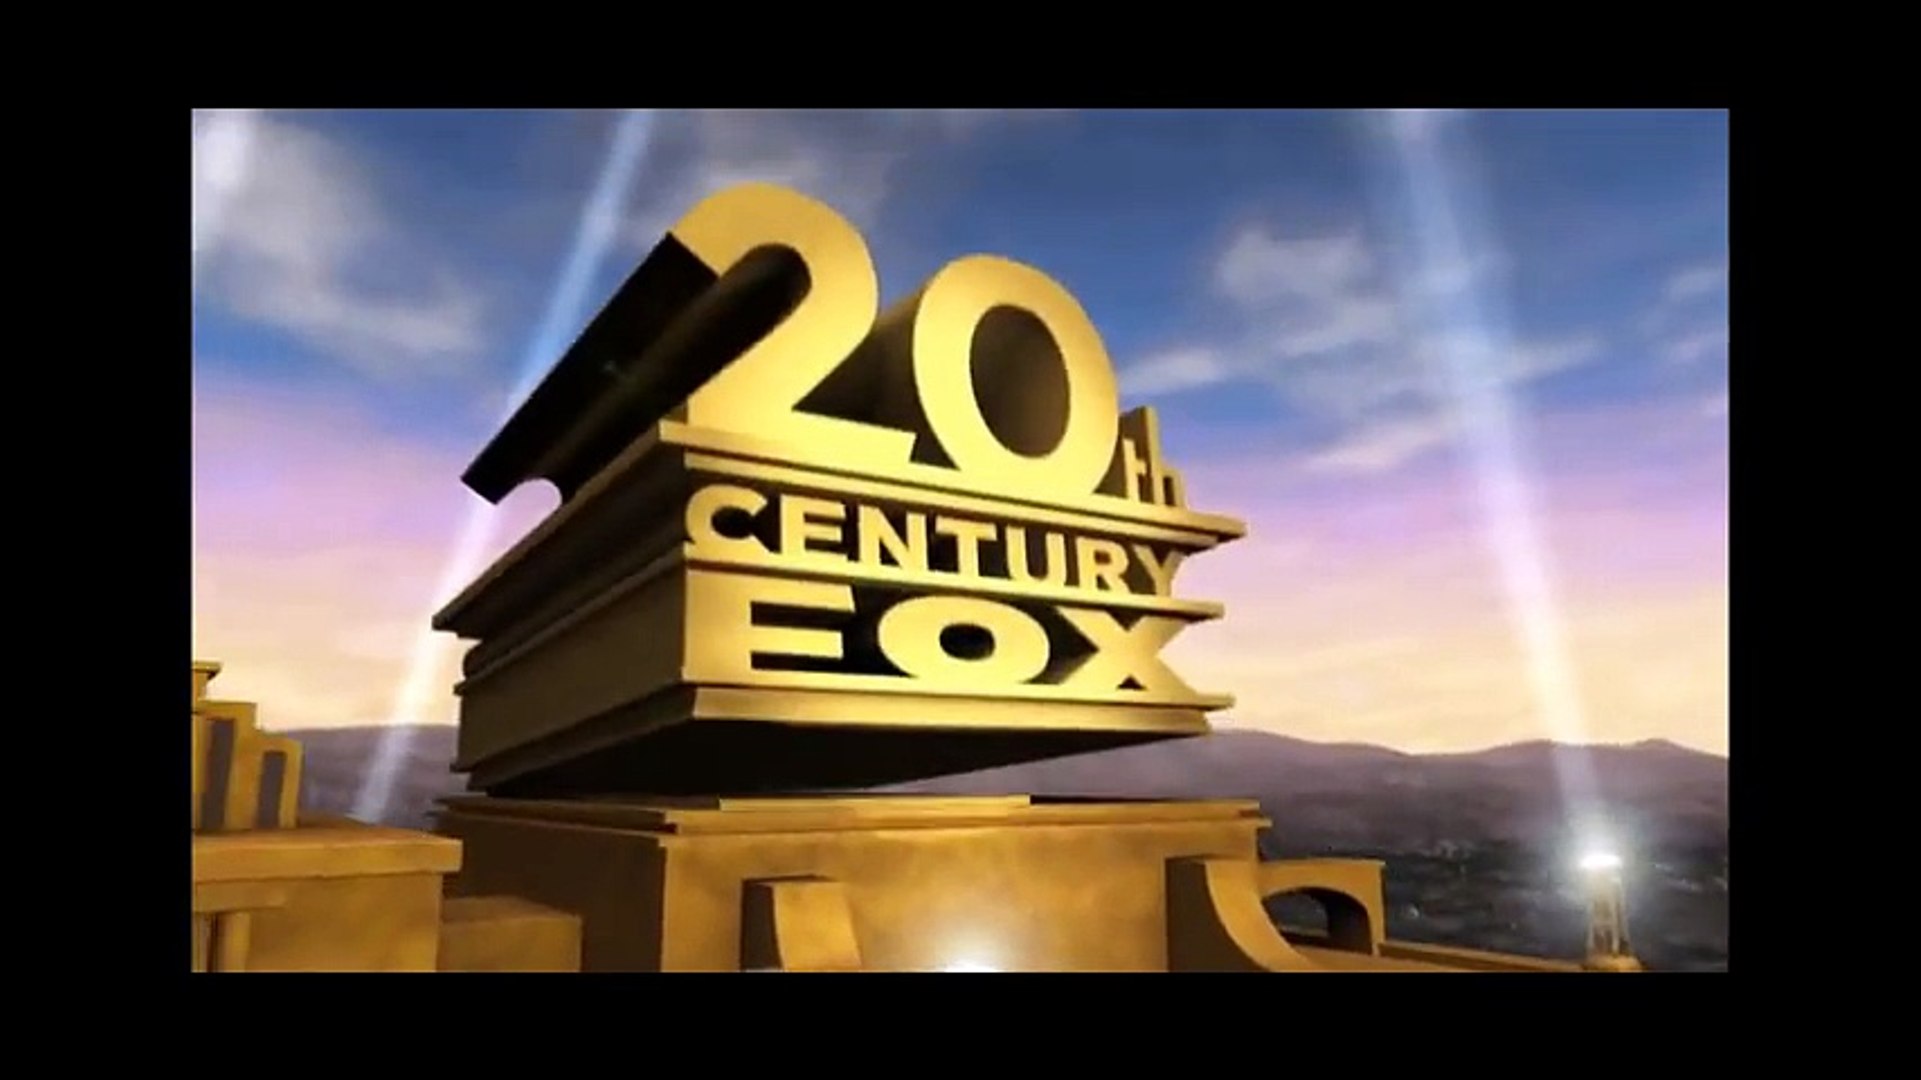 HOLLYWOOD STUDIO with 20TH CENTURY FOX logo 1983 ad on top of art